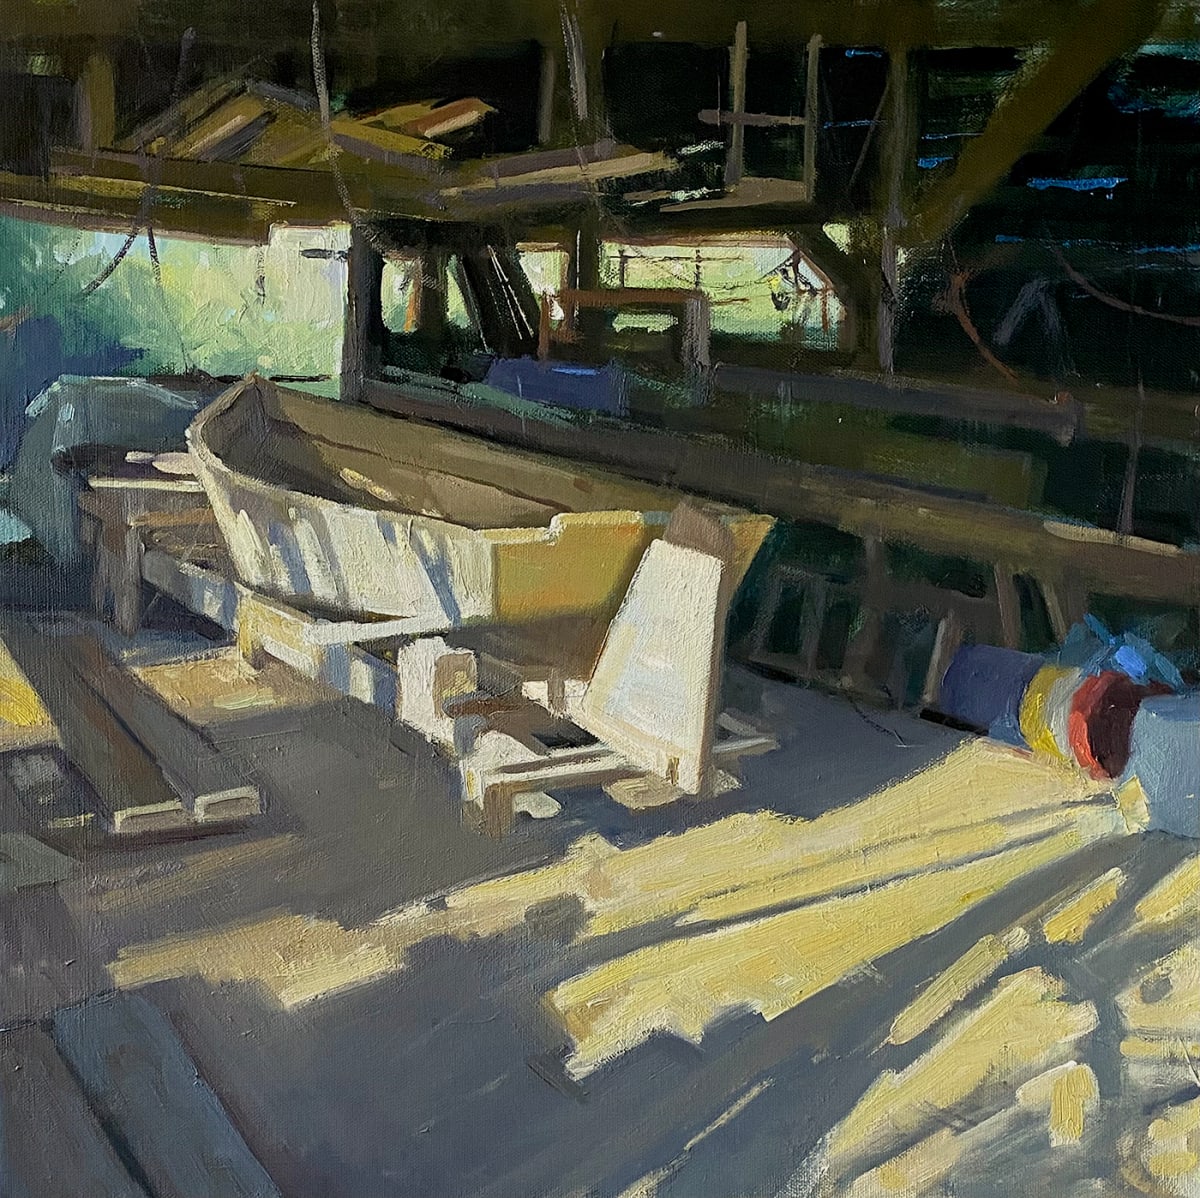 Light and Shadows by Katie Dobson Cundiff  Image: Awarded Silver Medal, Oil Painters of America Eastern Regional 2023, Beverly McNeil Gallery, Birmingham, AL - Judge Roger Dale Brown